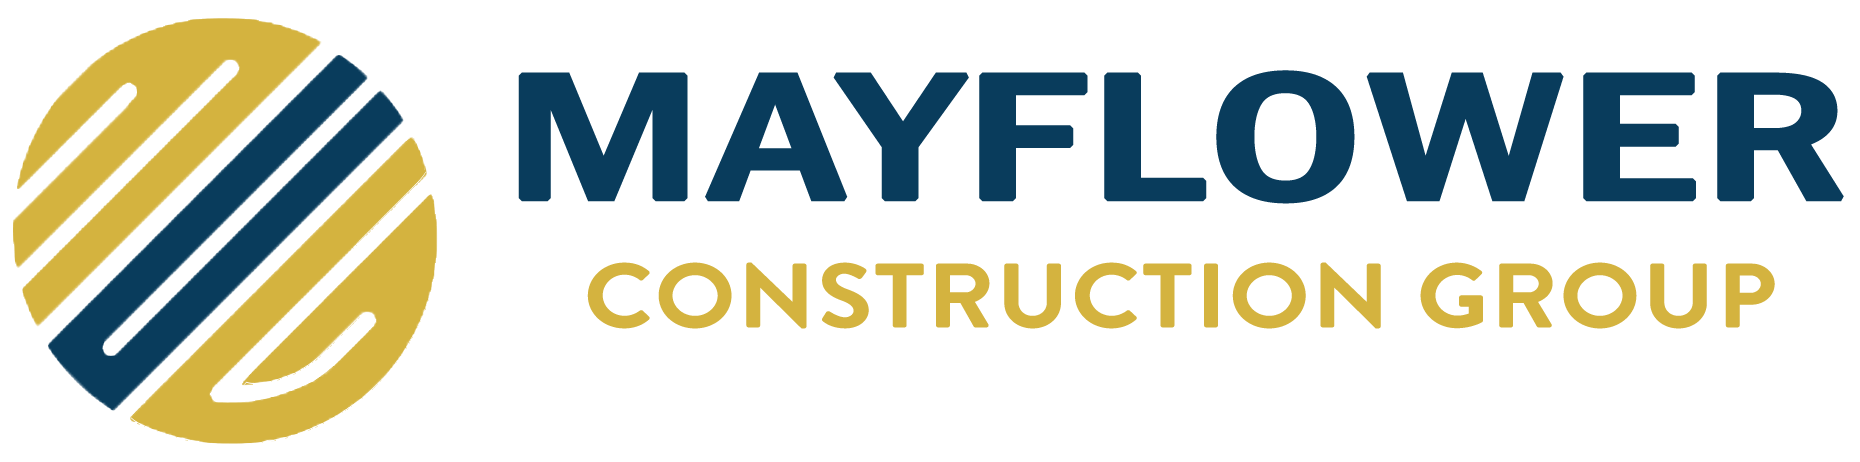 Mayflower Construction Group Highlights What Makes Its Bathroom Remodeling Team Apart